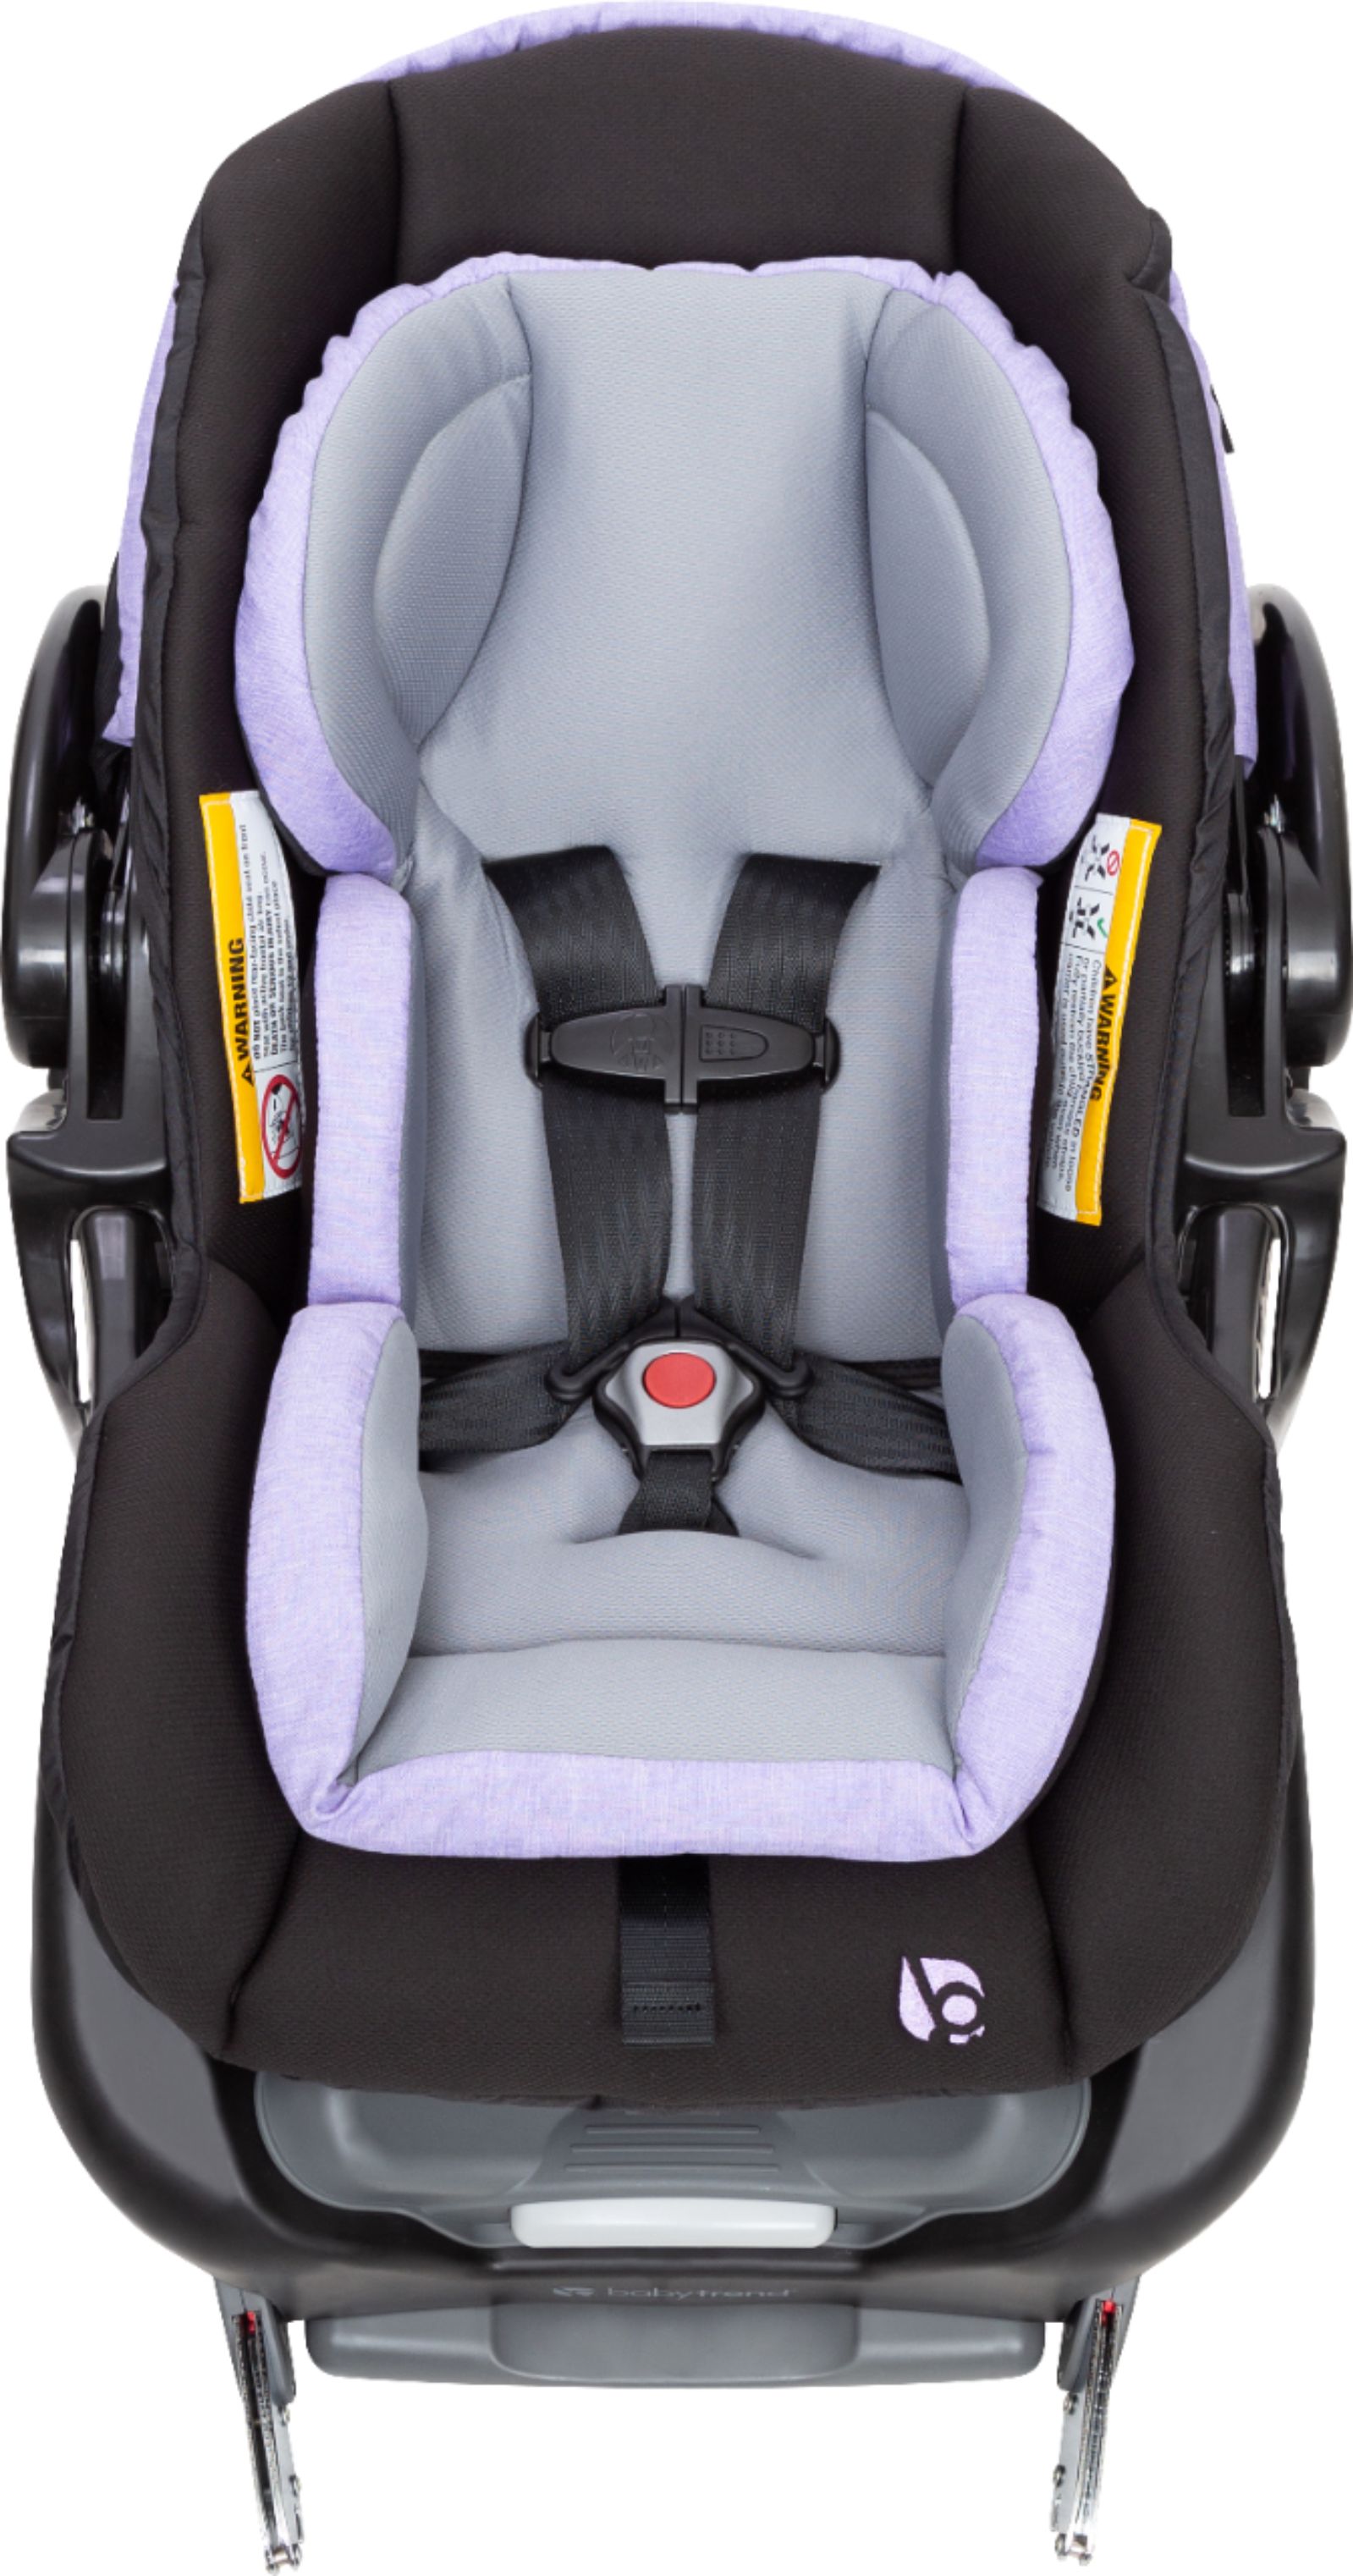 Best Baby Trend Secure Snap Tech 35 Infant Car Seat Lavender Ice Cs66c49b - How Long Is Baby Trend Car Seat Good For